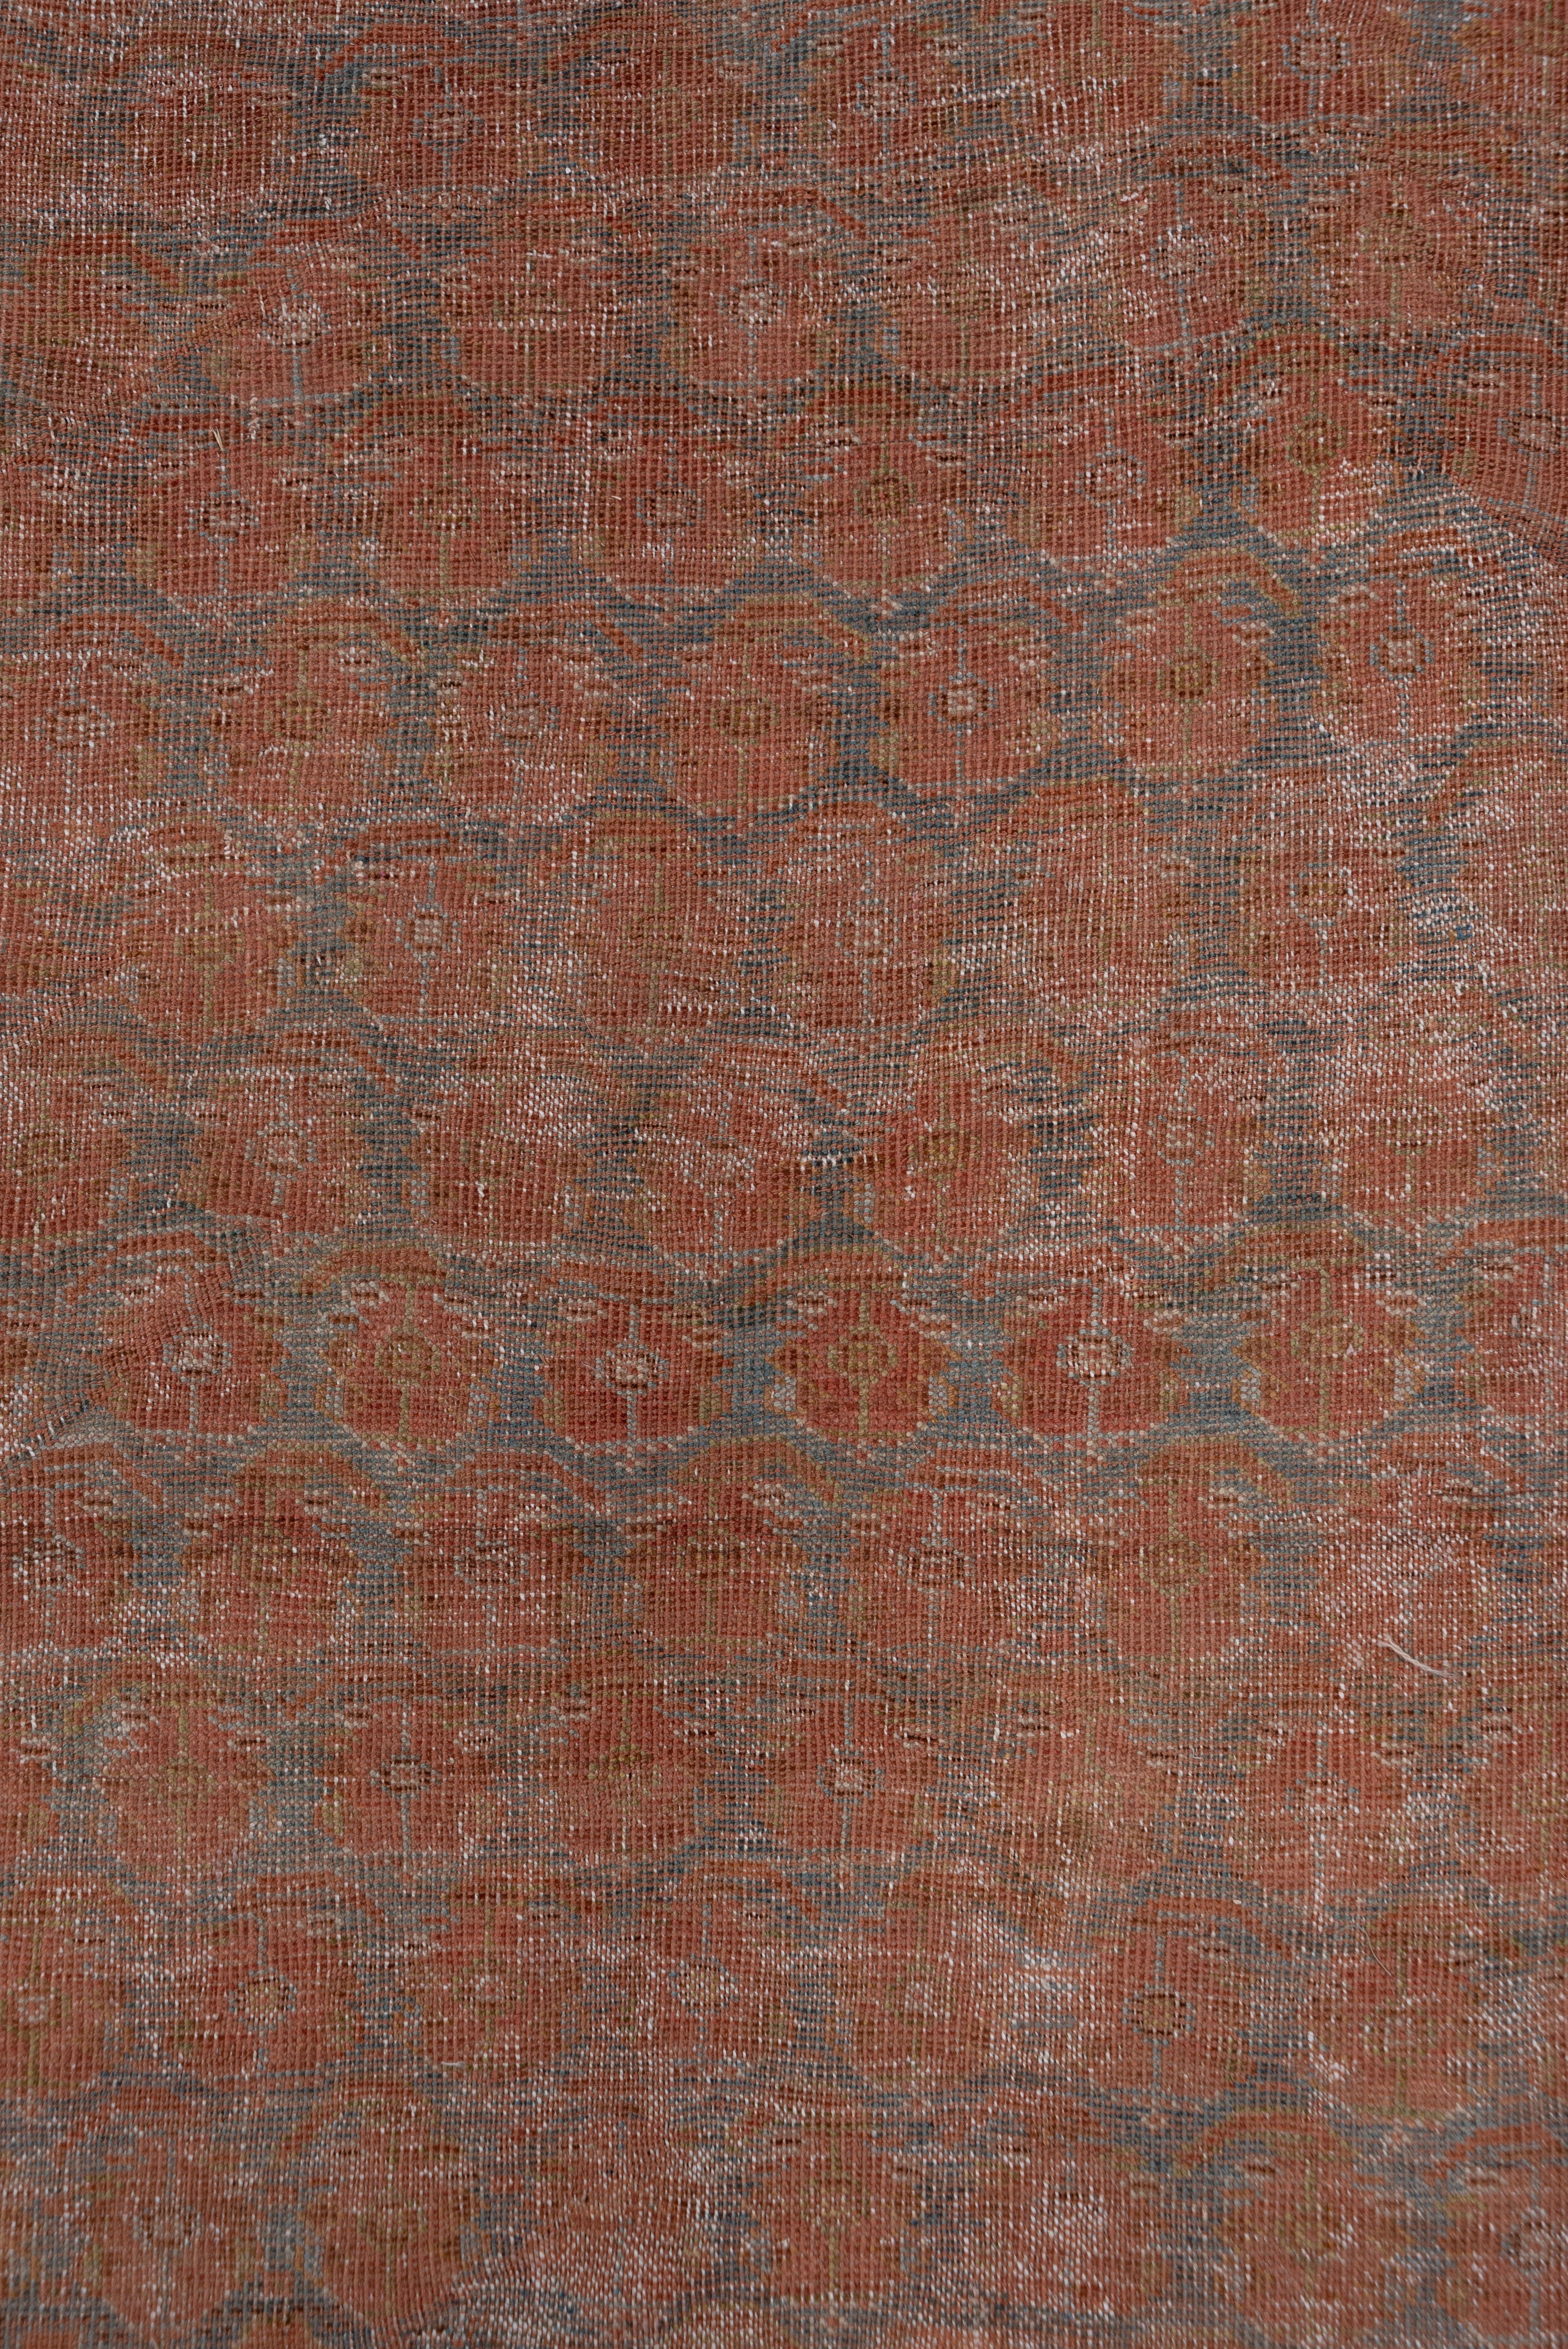 Wool Unique Persian Afshar Gallery Rug, Allover Field, Soft Blue & Orange Tones For Sale